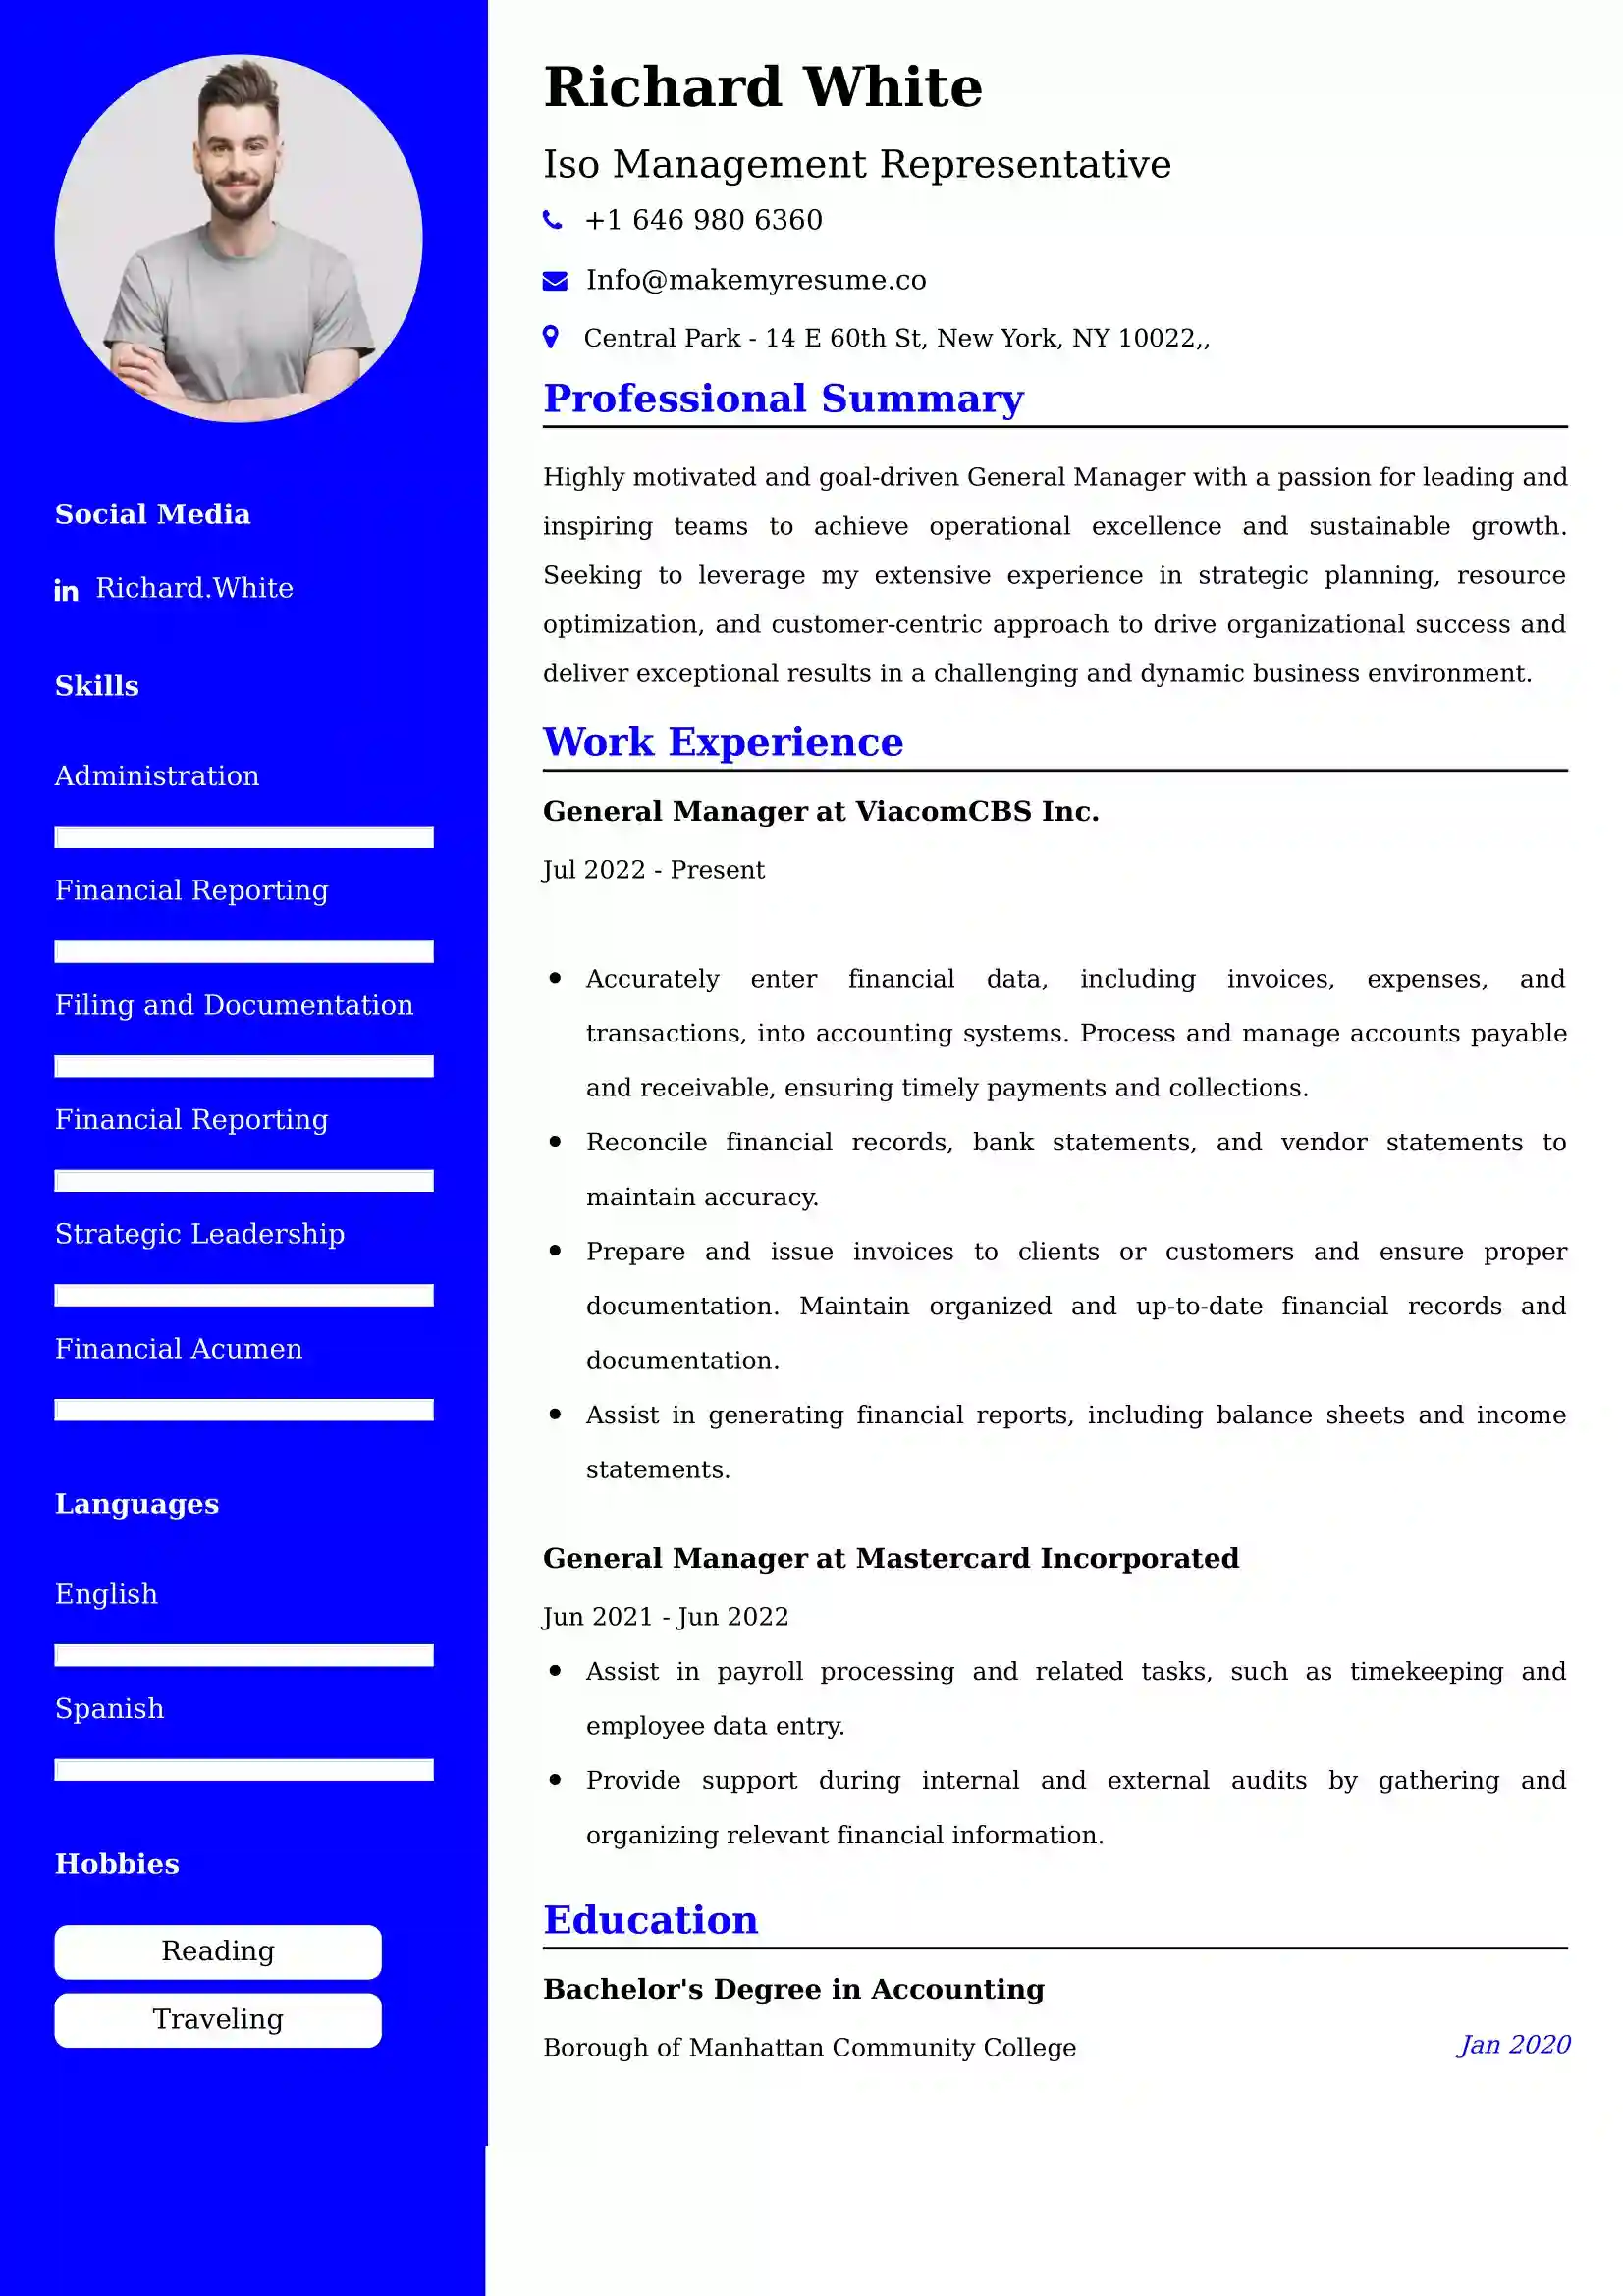 Iso Management Representative Resume Examples - Brazilian Format, Latest Template